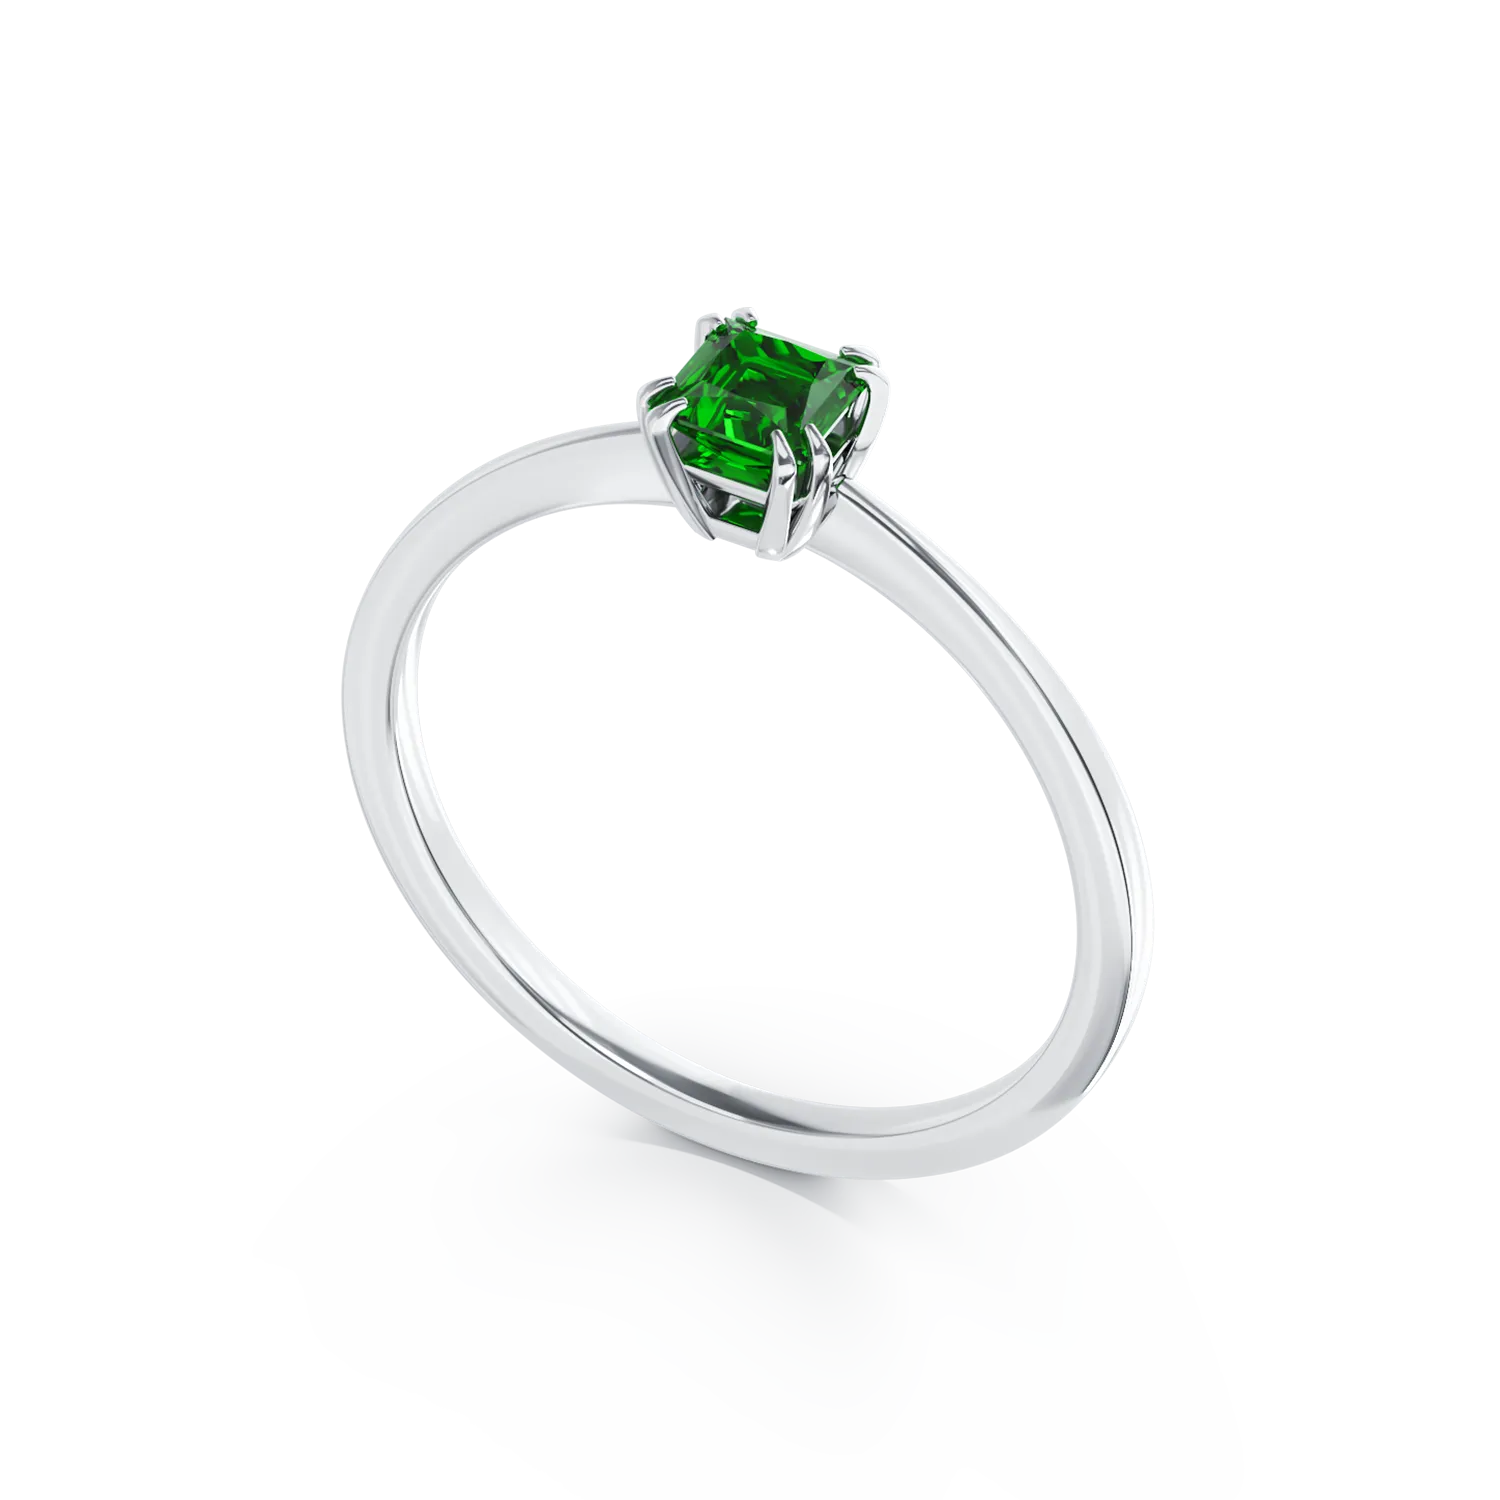 18K white gold engagement ring with 0.39ct emerald